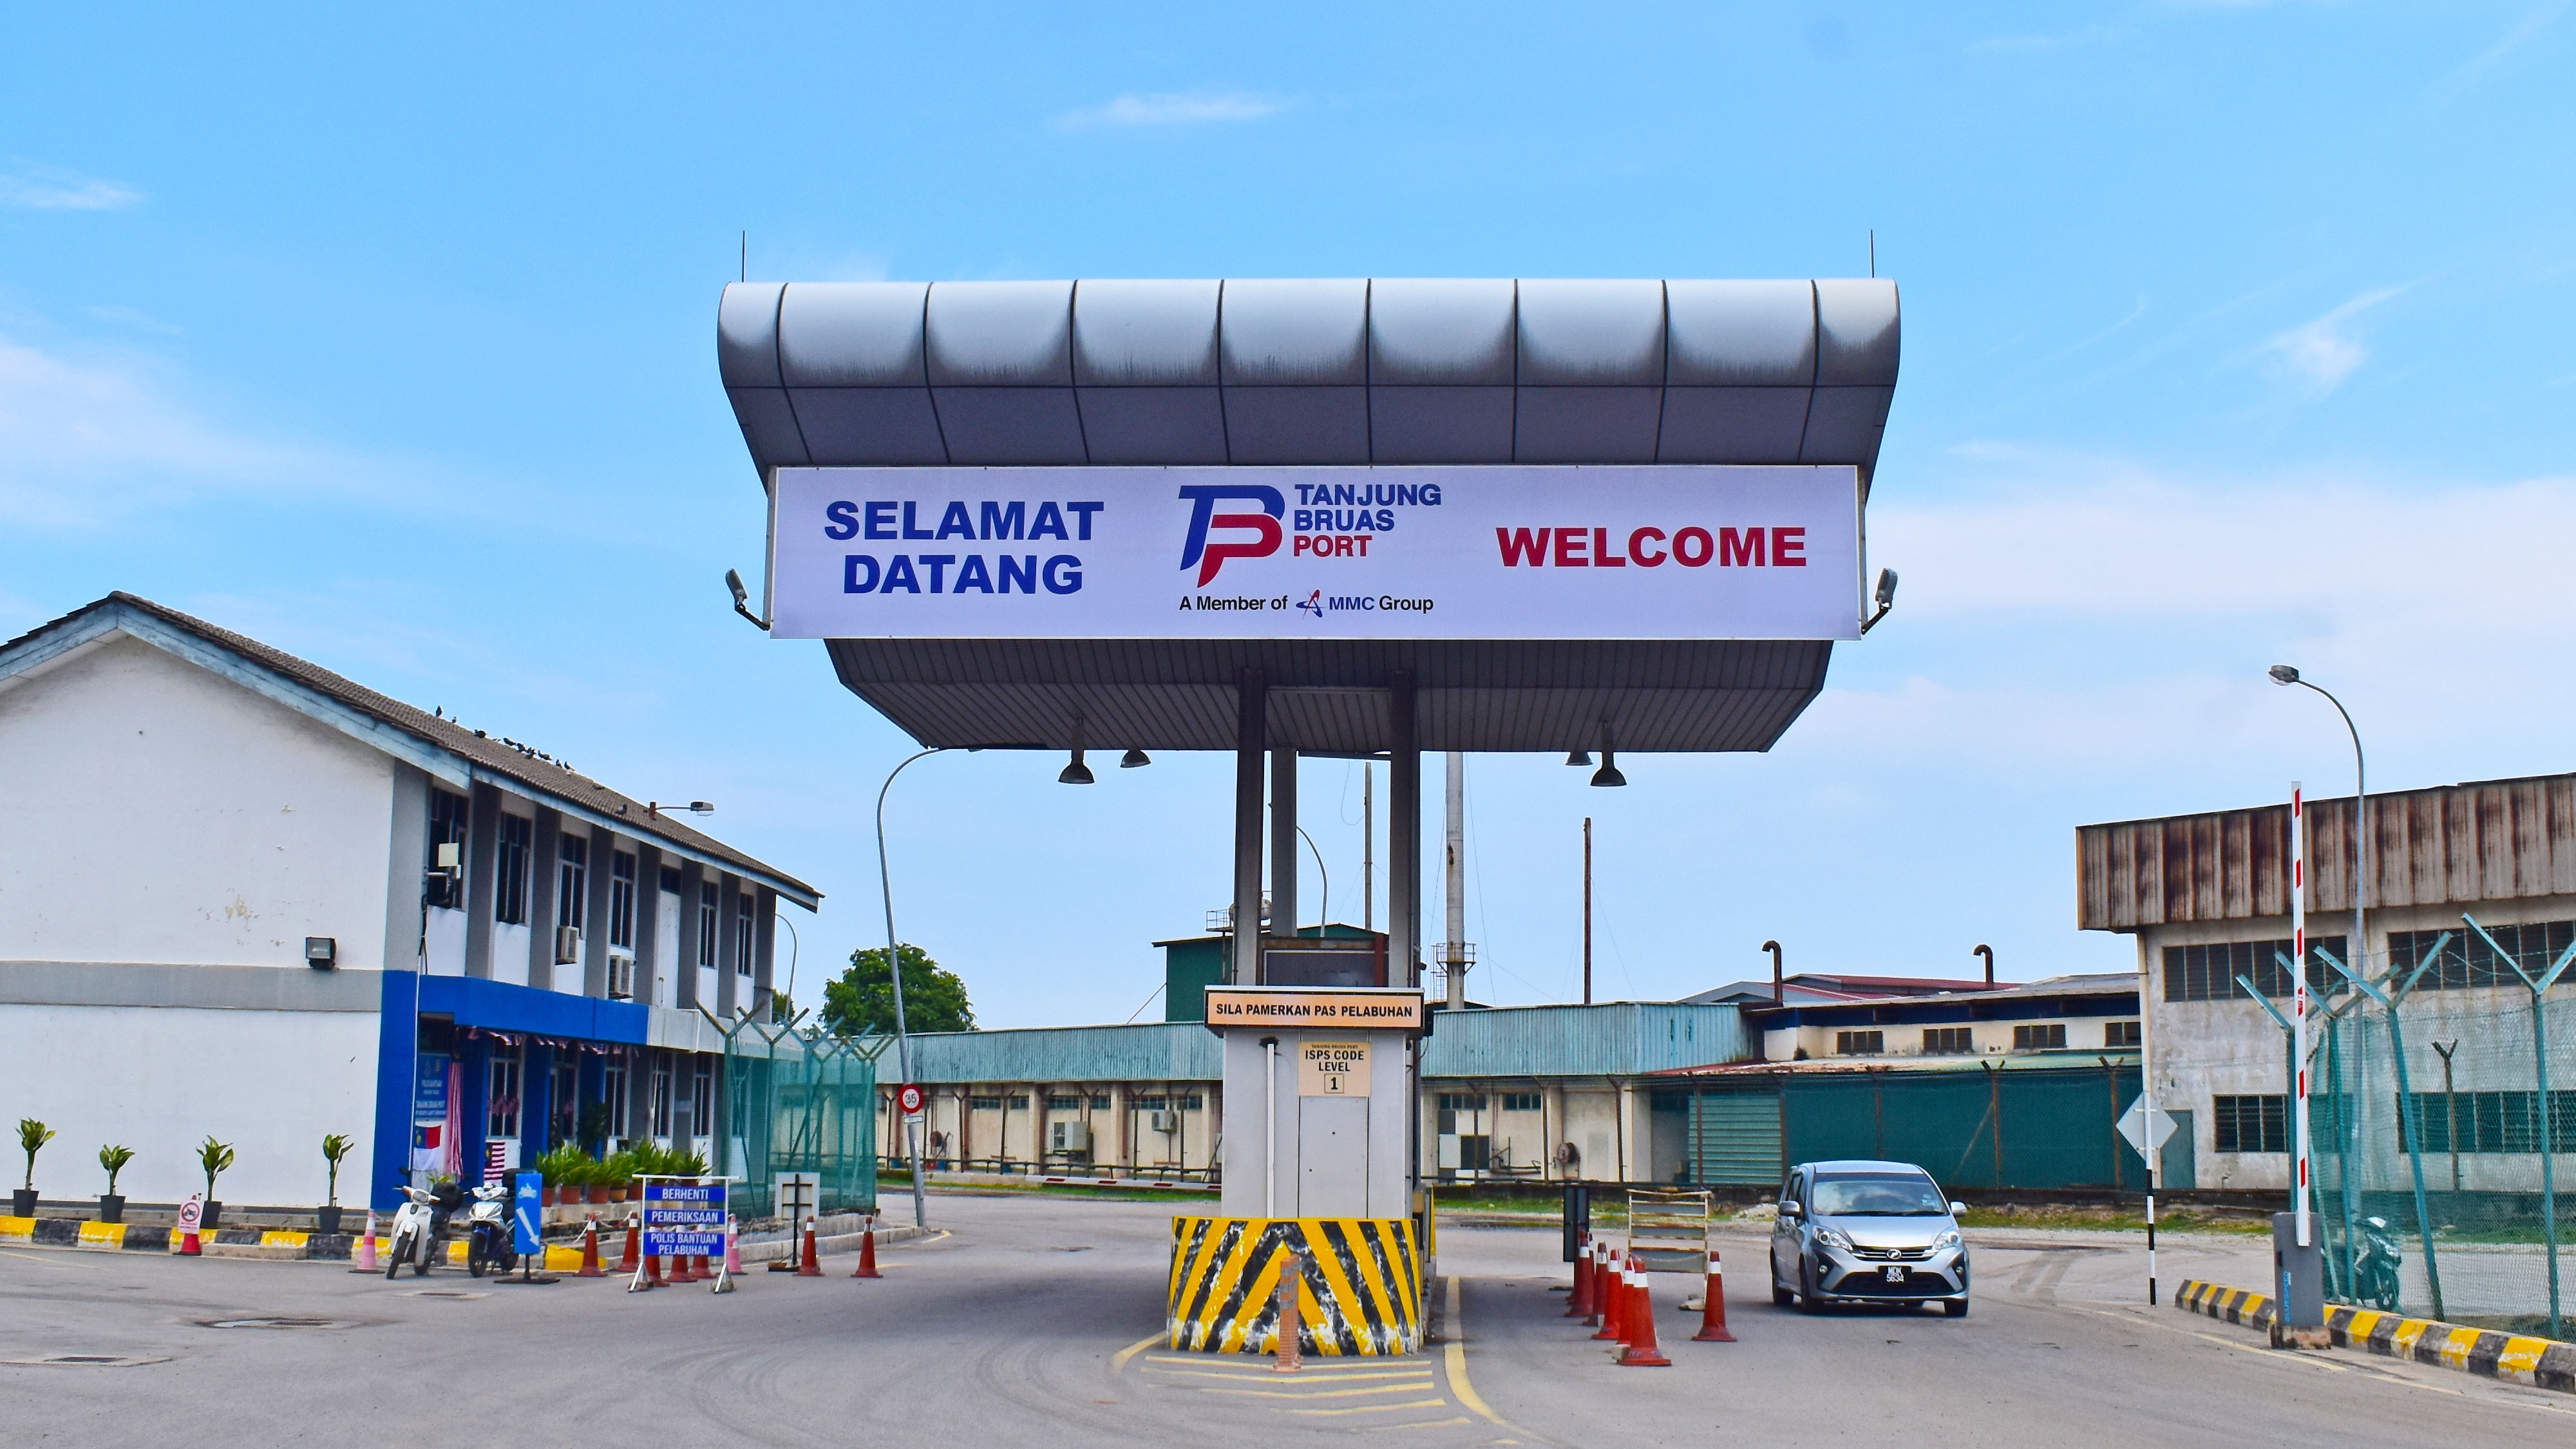 New container feeder service connects Tanjung Bruas Port to Port Klang - TMR